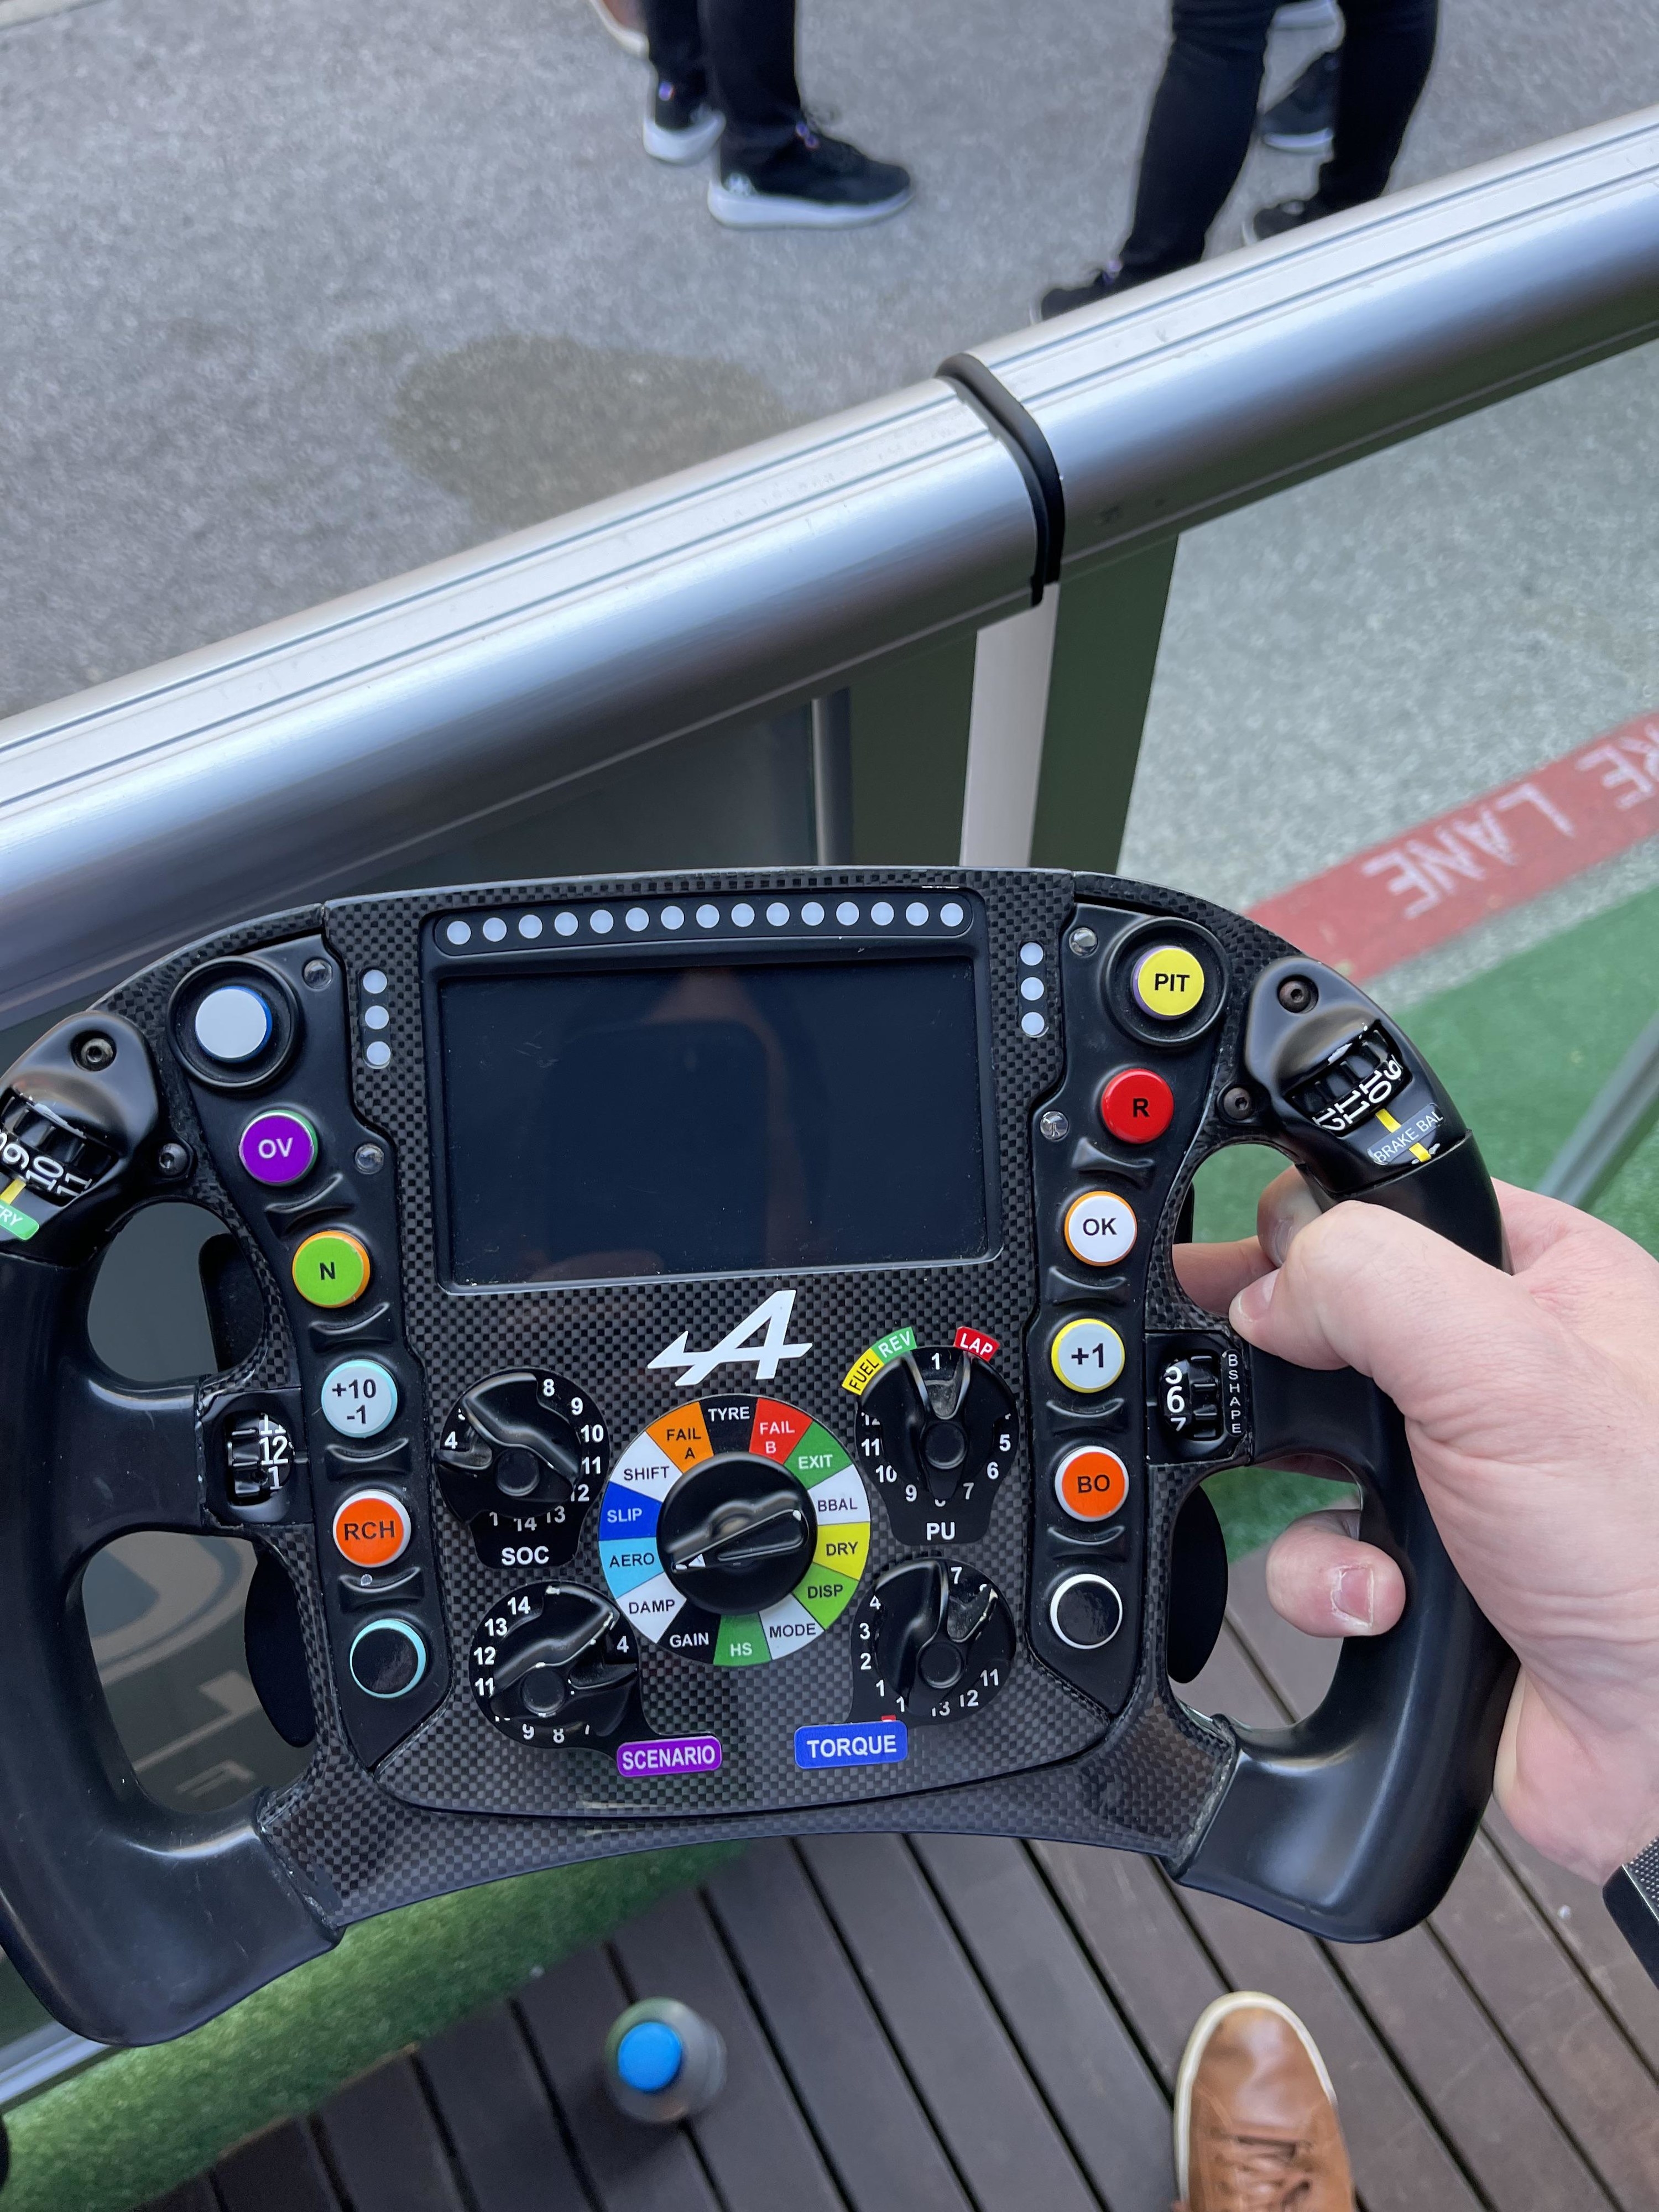 A race car steering wheel that looks like a very intense video game controller